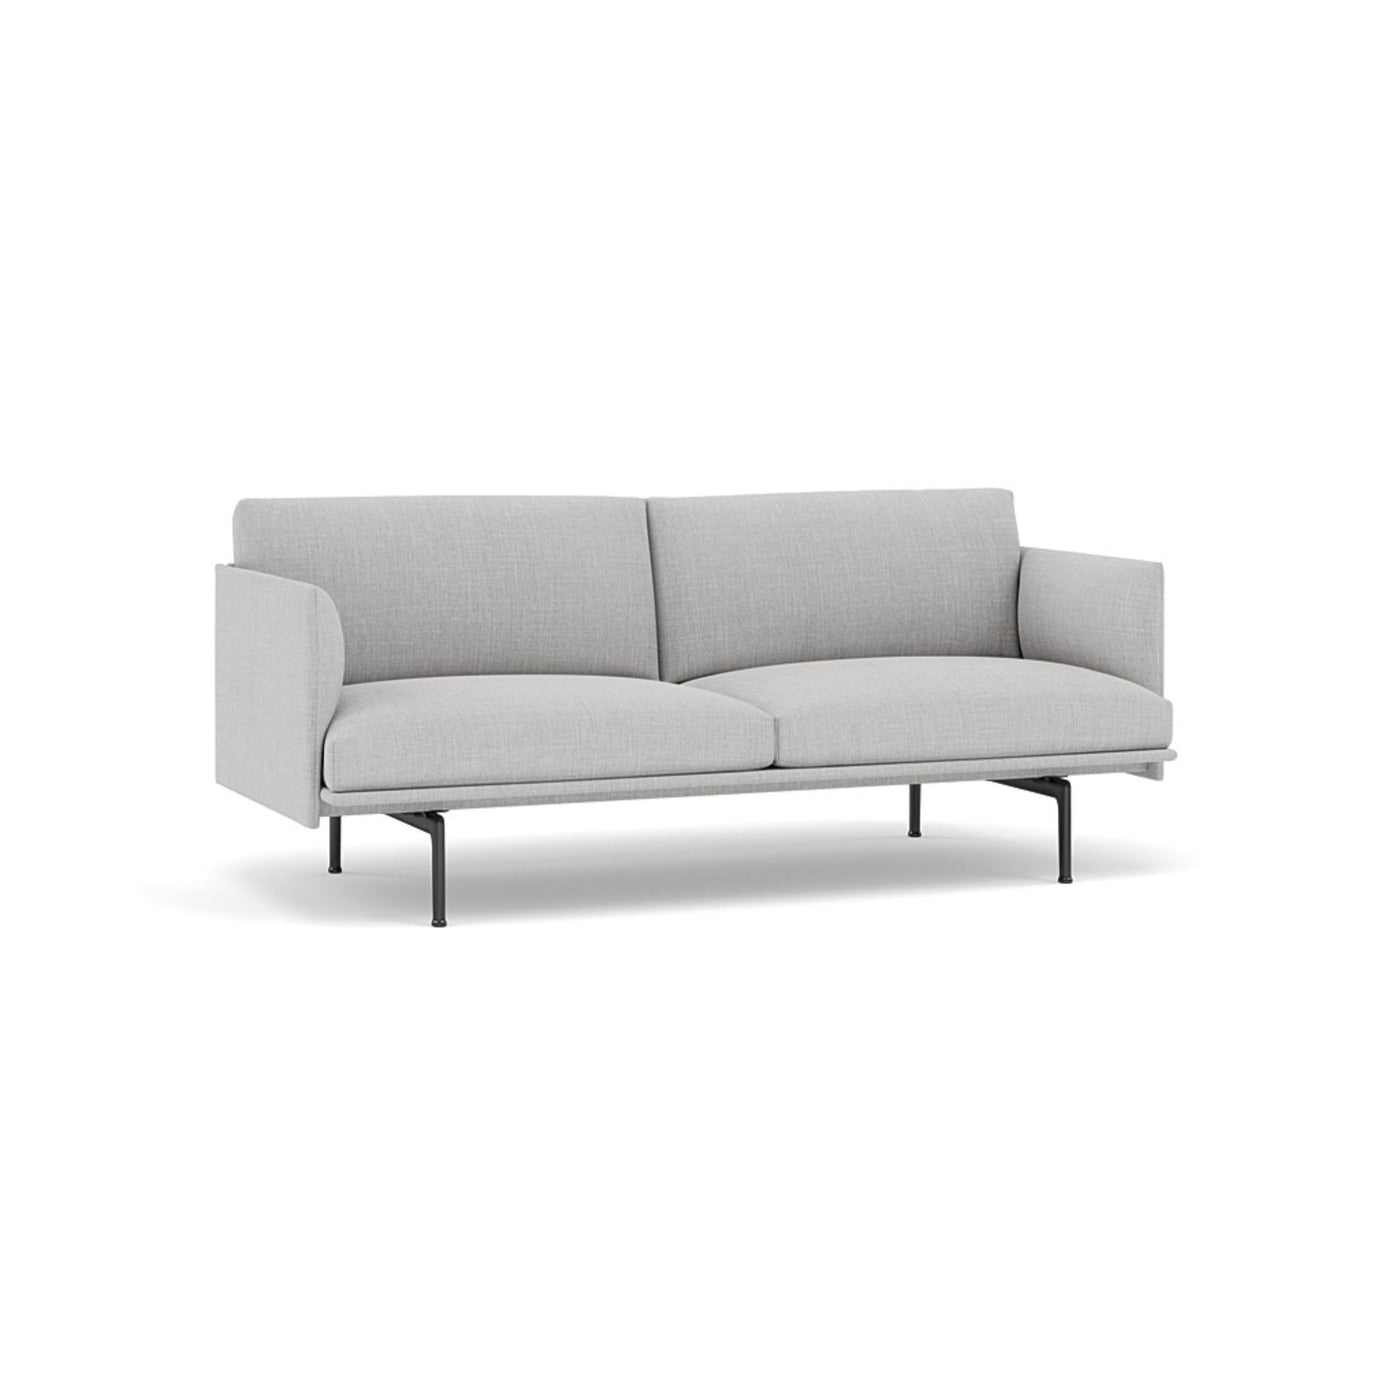 Muuto Outline Studio Sofa. Made to order from someday designs. #colour_remix-123